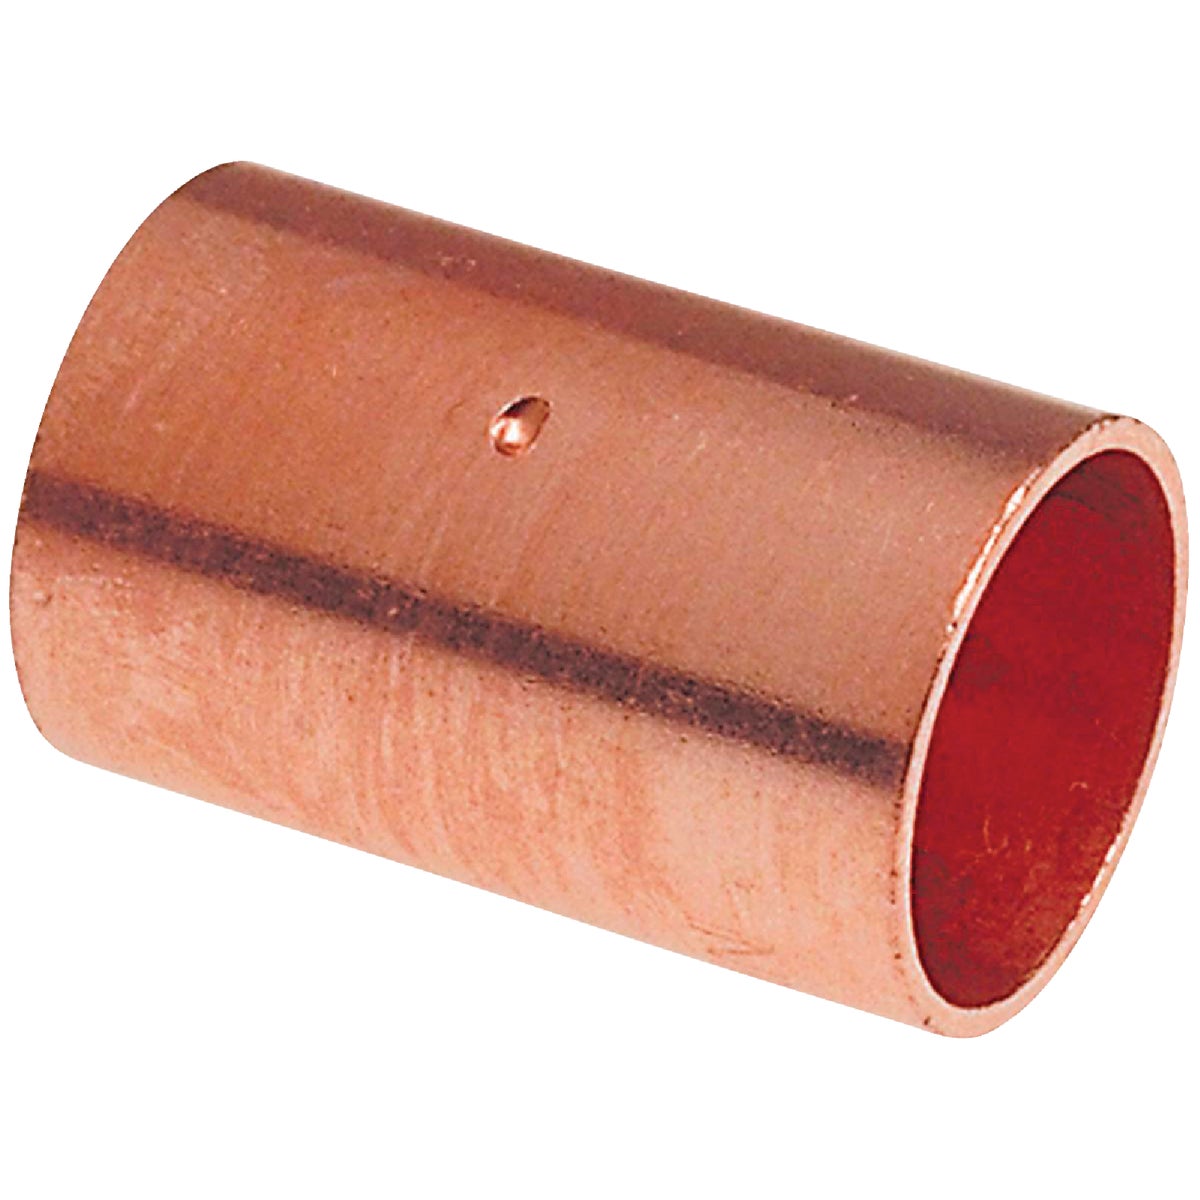 NIBCO W00830D NIBCO 1-1/2 In. x 1-1/2 In. Copper Coupling with Stop W00830D